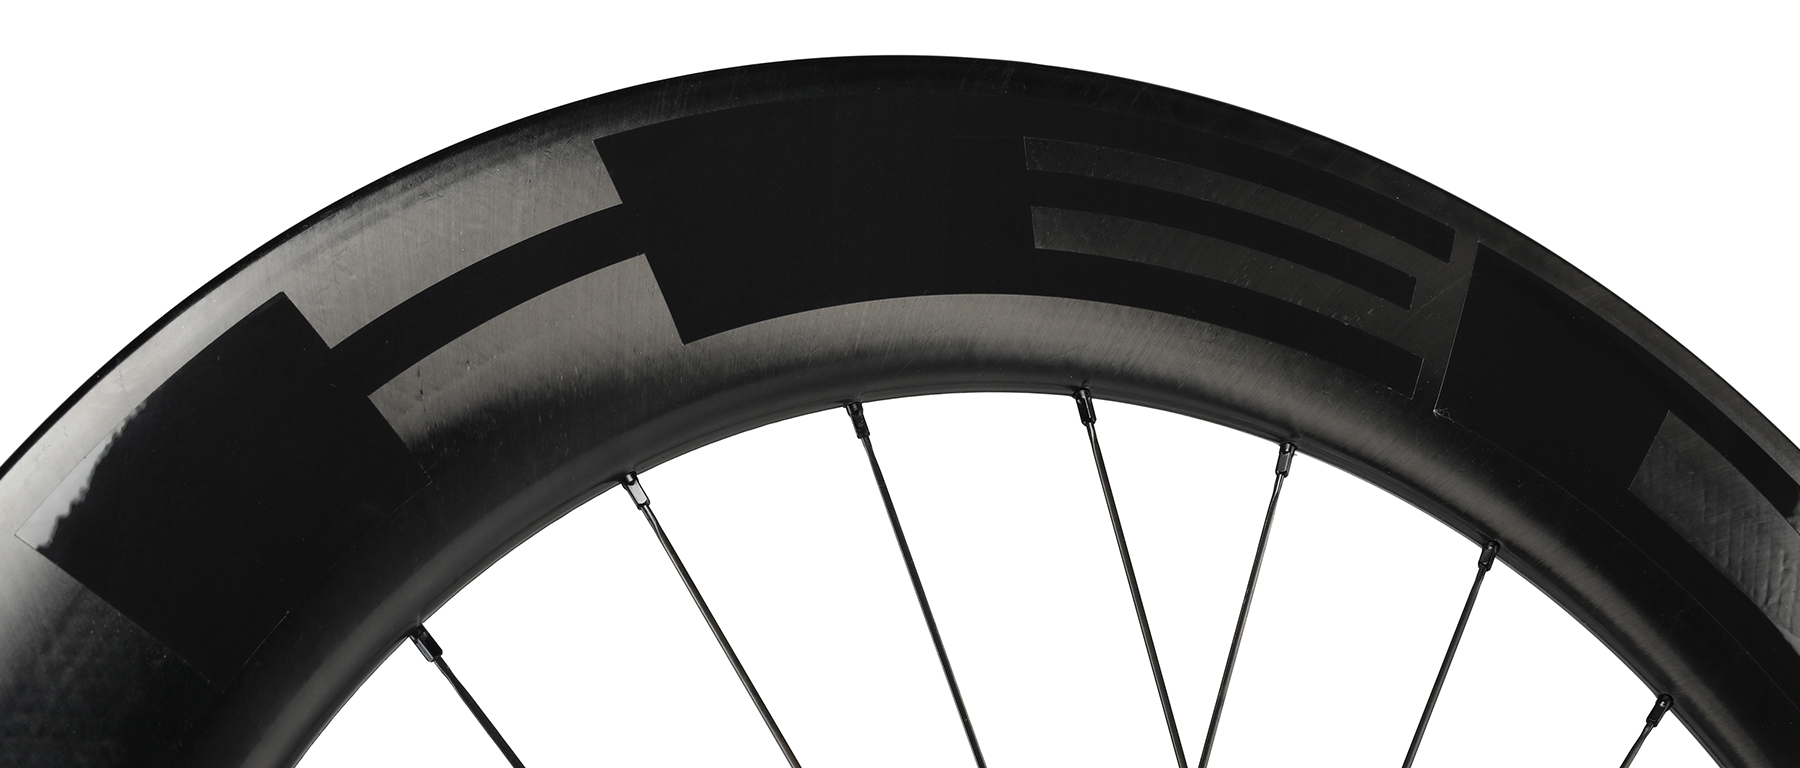 HED Vanquish RC8 Pro Front Wheel